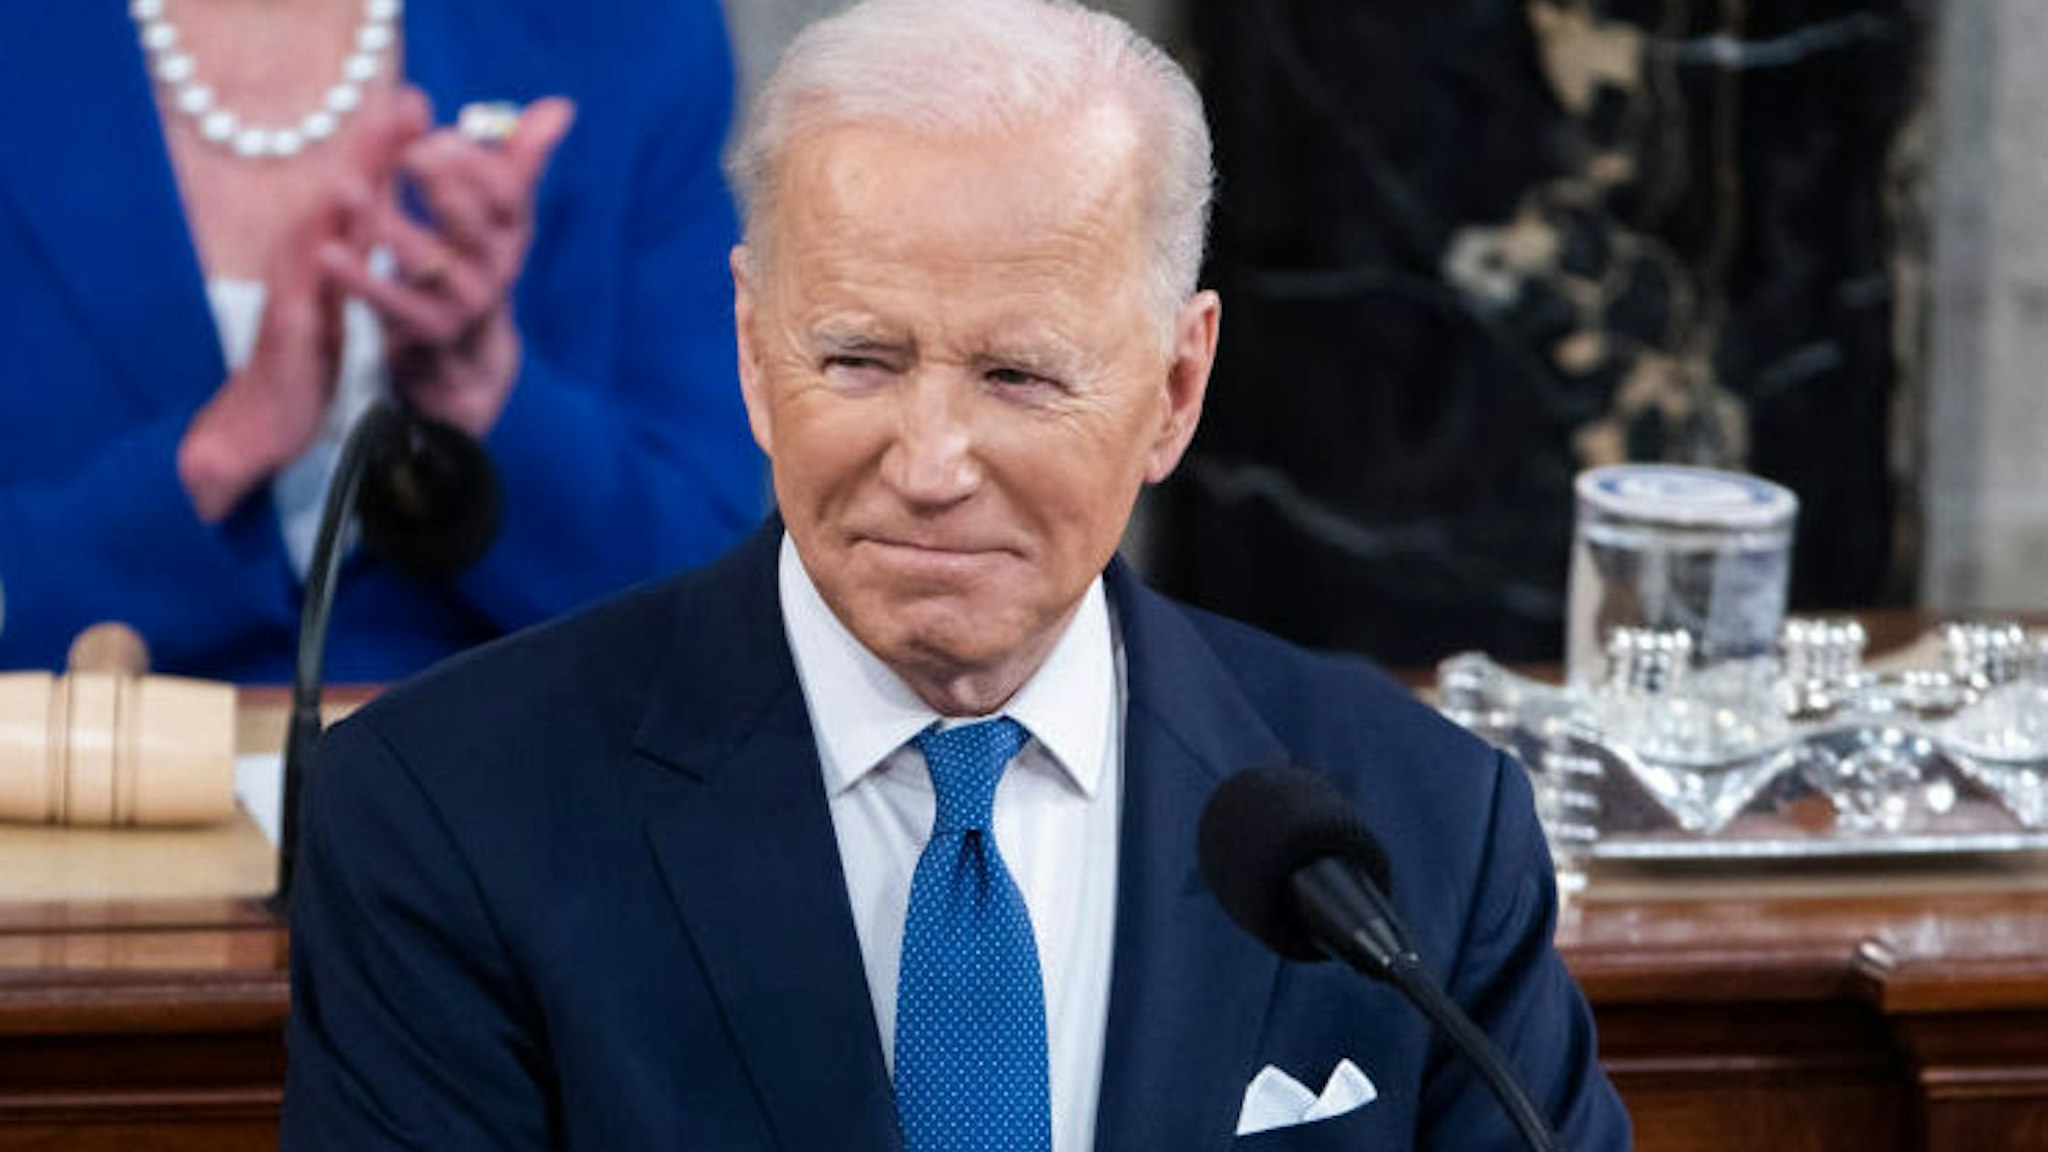 U.S. President Joe Biden during a State of the Union address at the U.S. Capitol in Washington, D.C., U.S., on Tuesday, March 1, 2022.